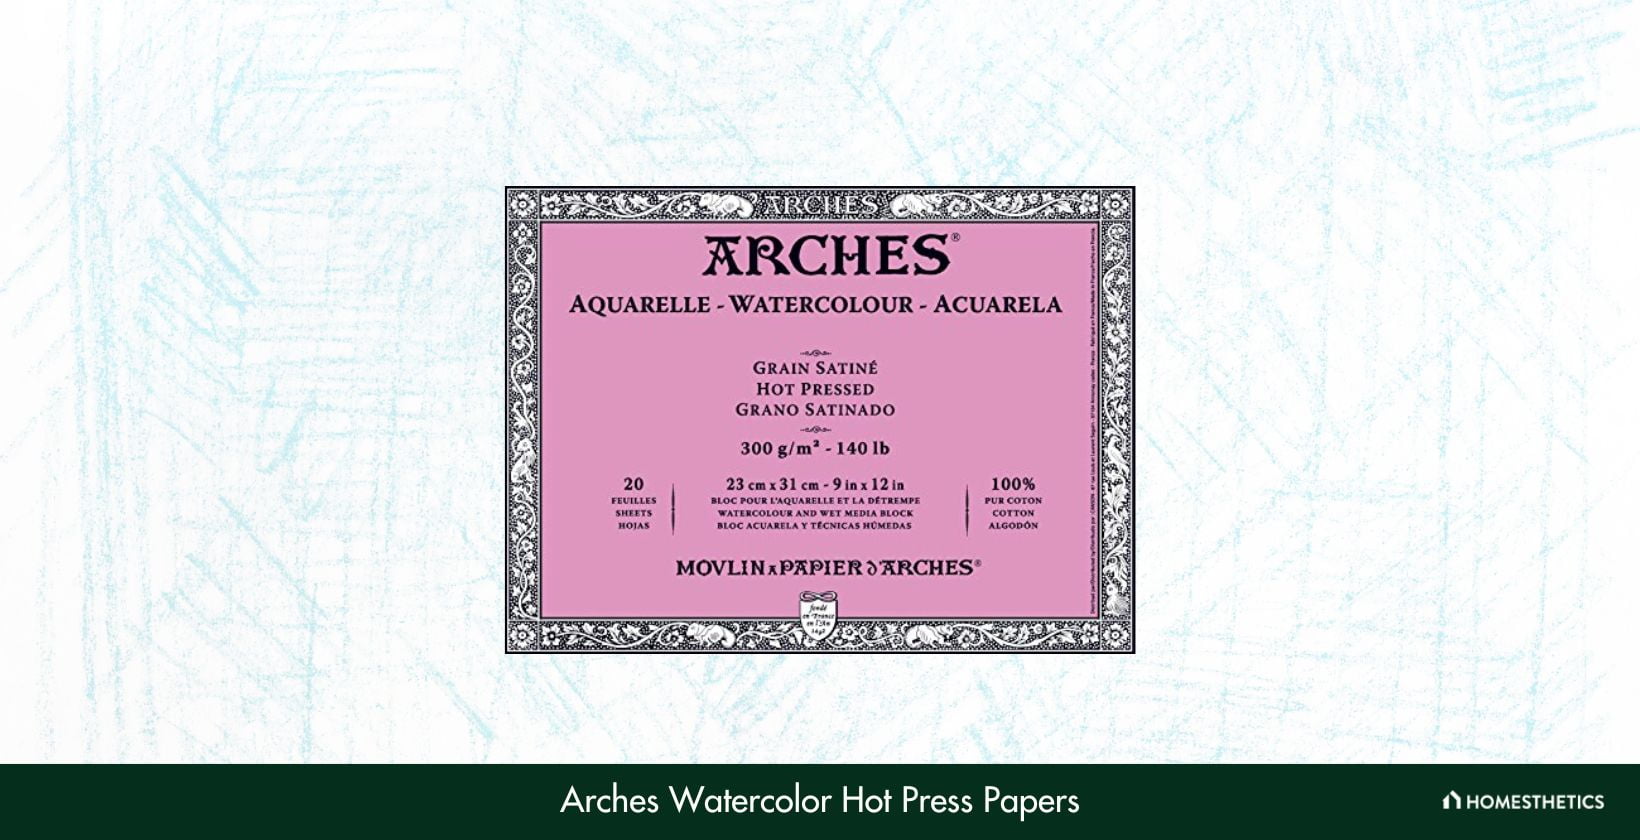 Arches Watercolor 140 lb Hot Press Papers